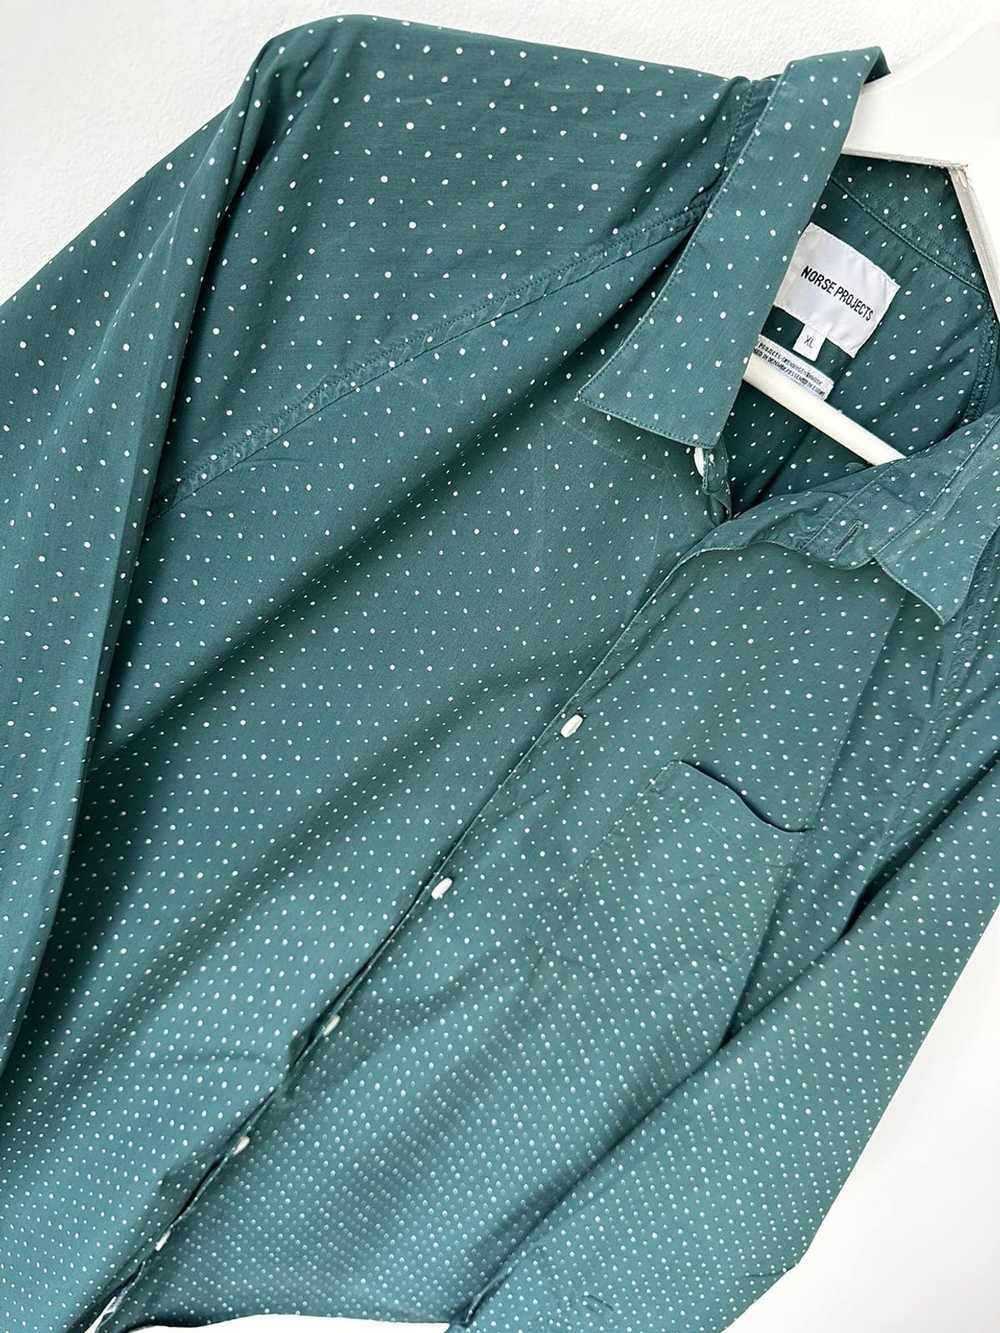 Norse Projects Norse Projects Mads Polka Dot Shirt - image 3